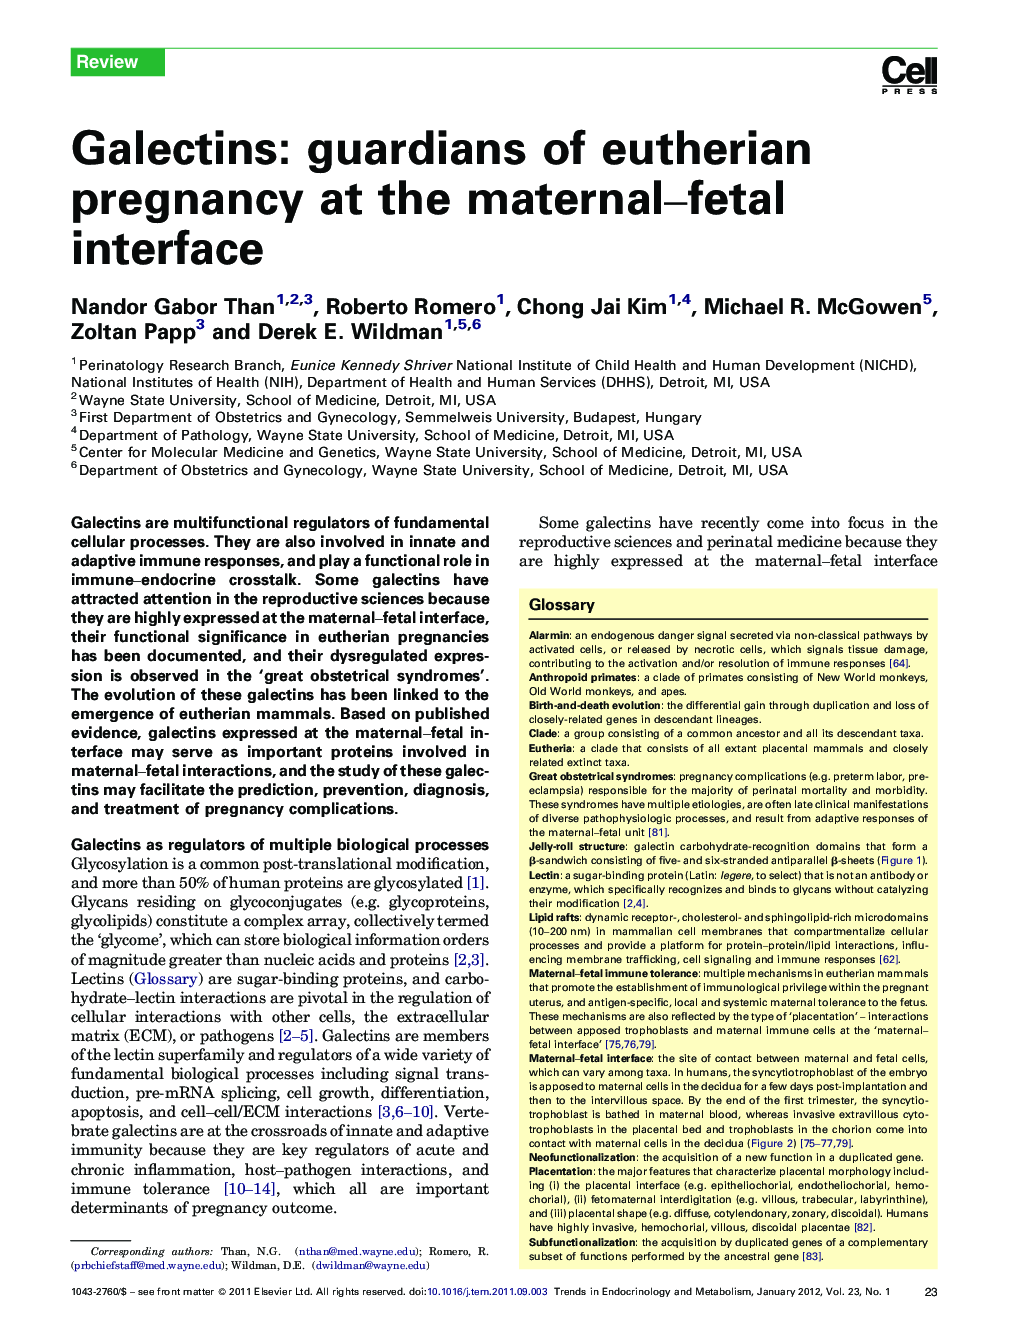 Galectins: guardians of eutherian pregnancy at the maternal–fetal interface